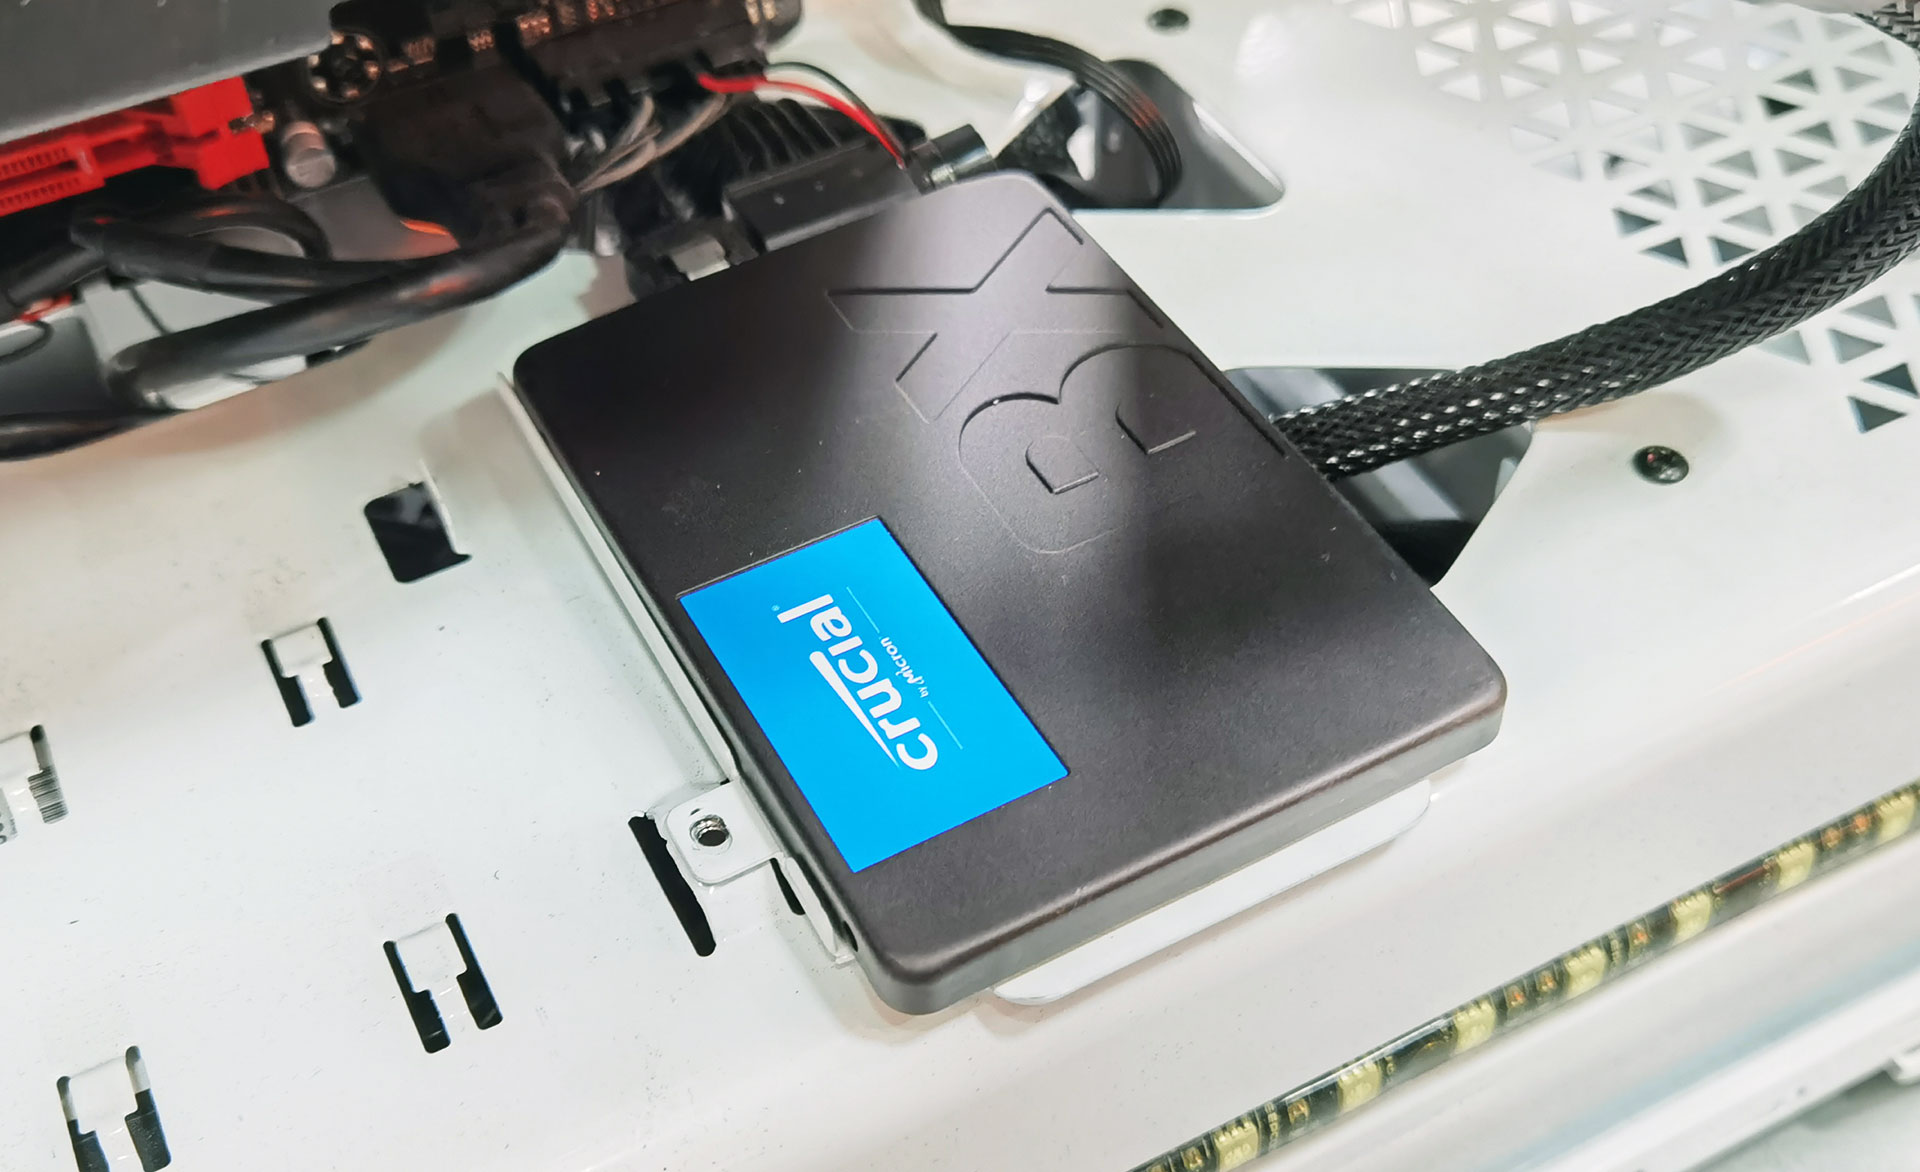 Review: Storage HDD a instead Crucial as Low-Cost SSD BX500 of 1TB